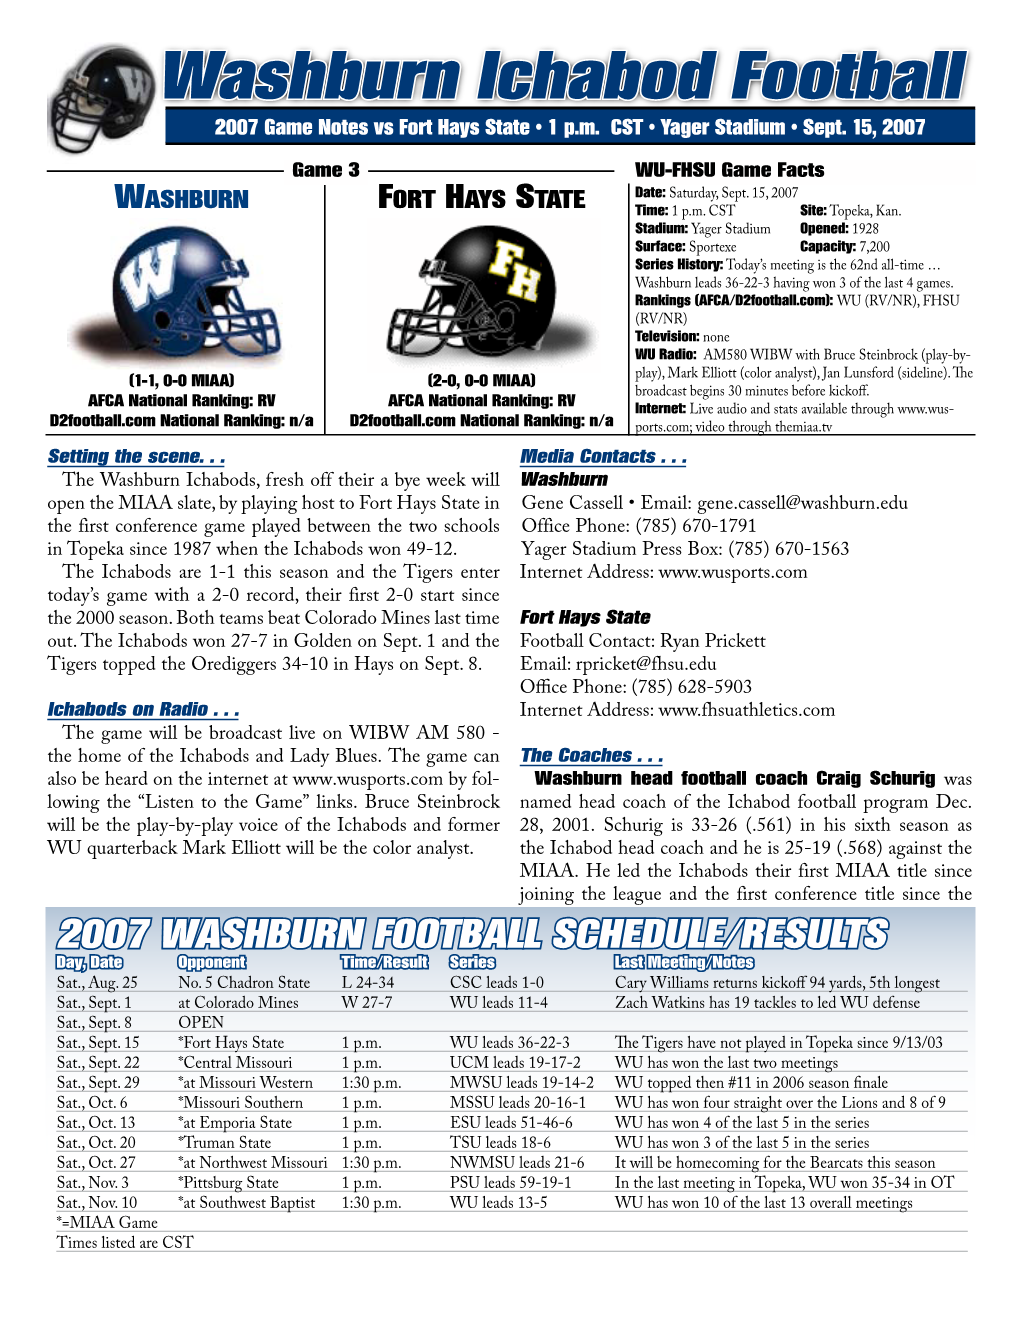 Washburn Ichabod Football 2007 Game Notes Vs Fort Hays State • 1 P.M